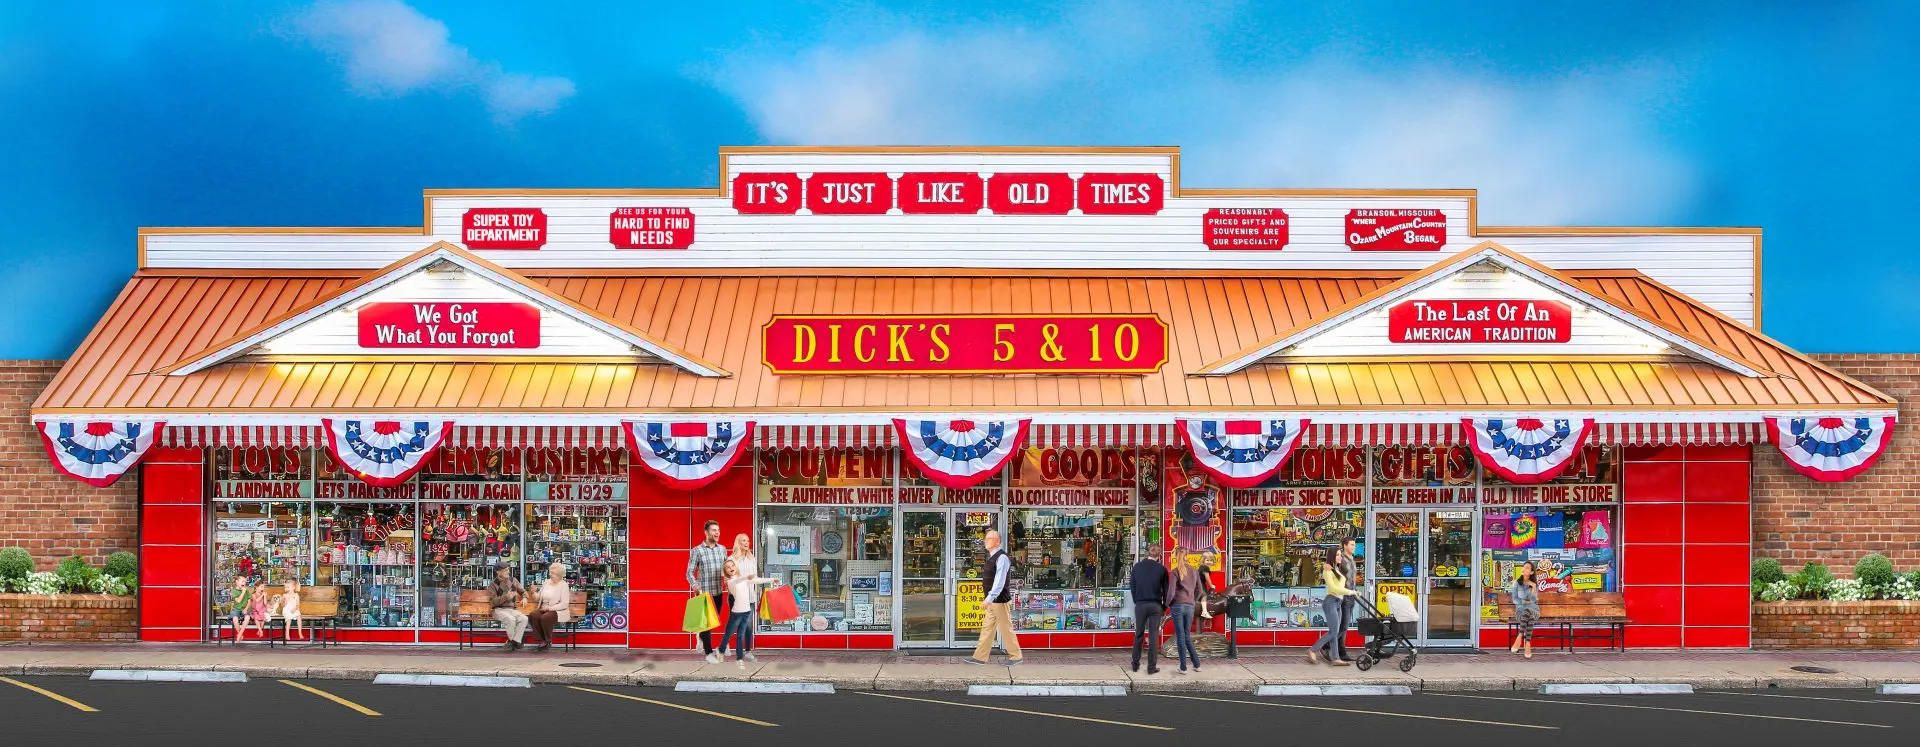 dicks 5 and 10 front of store